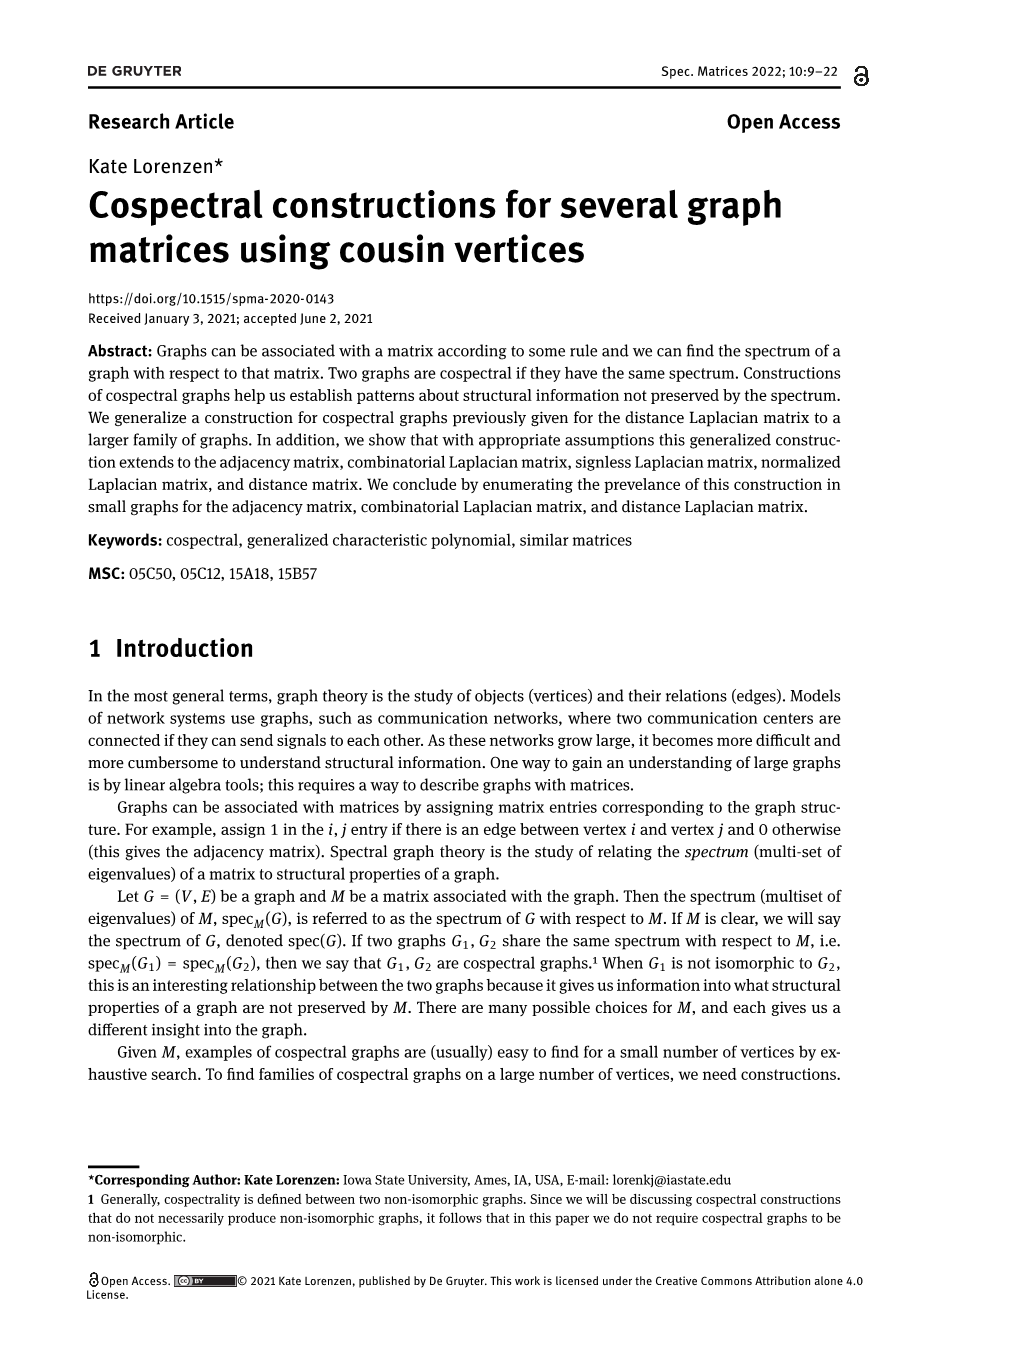 Cospectral Constructions for Several Graph Matrices Using Cousin Vertices Received January 3, 2021; Accepted June 2, 2021